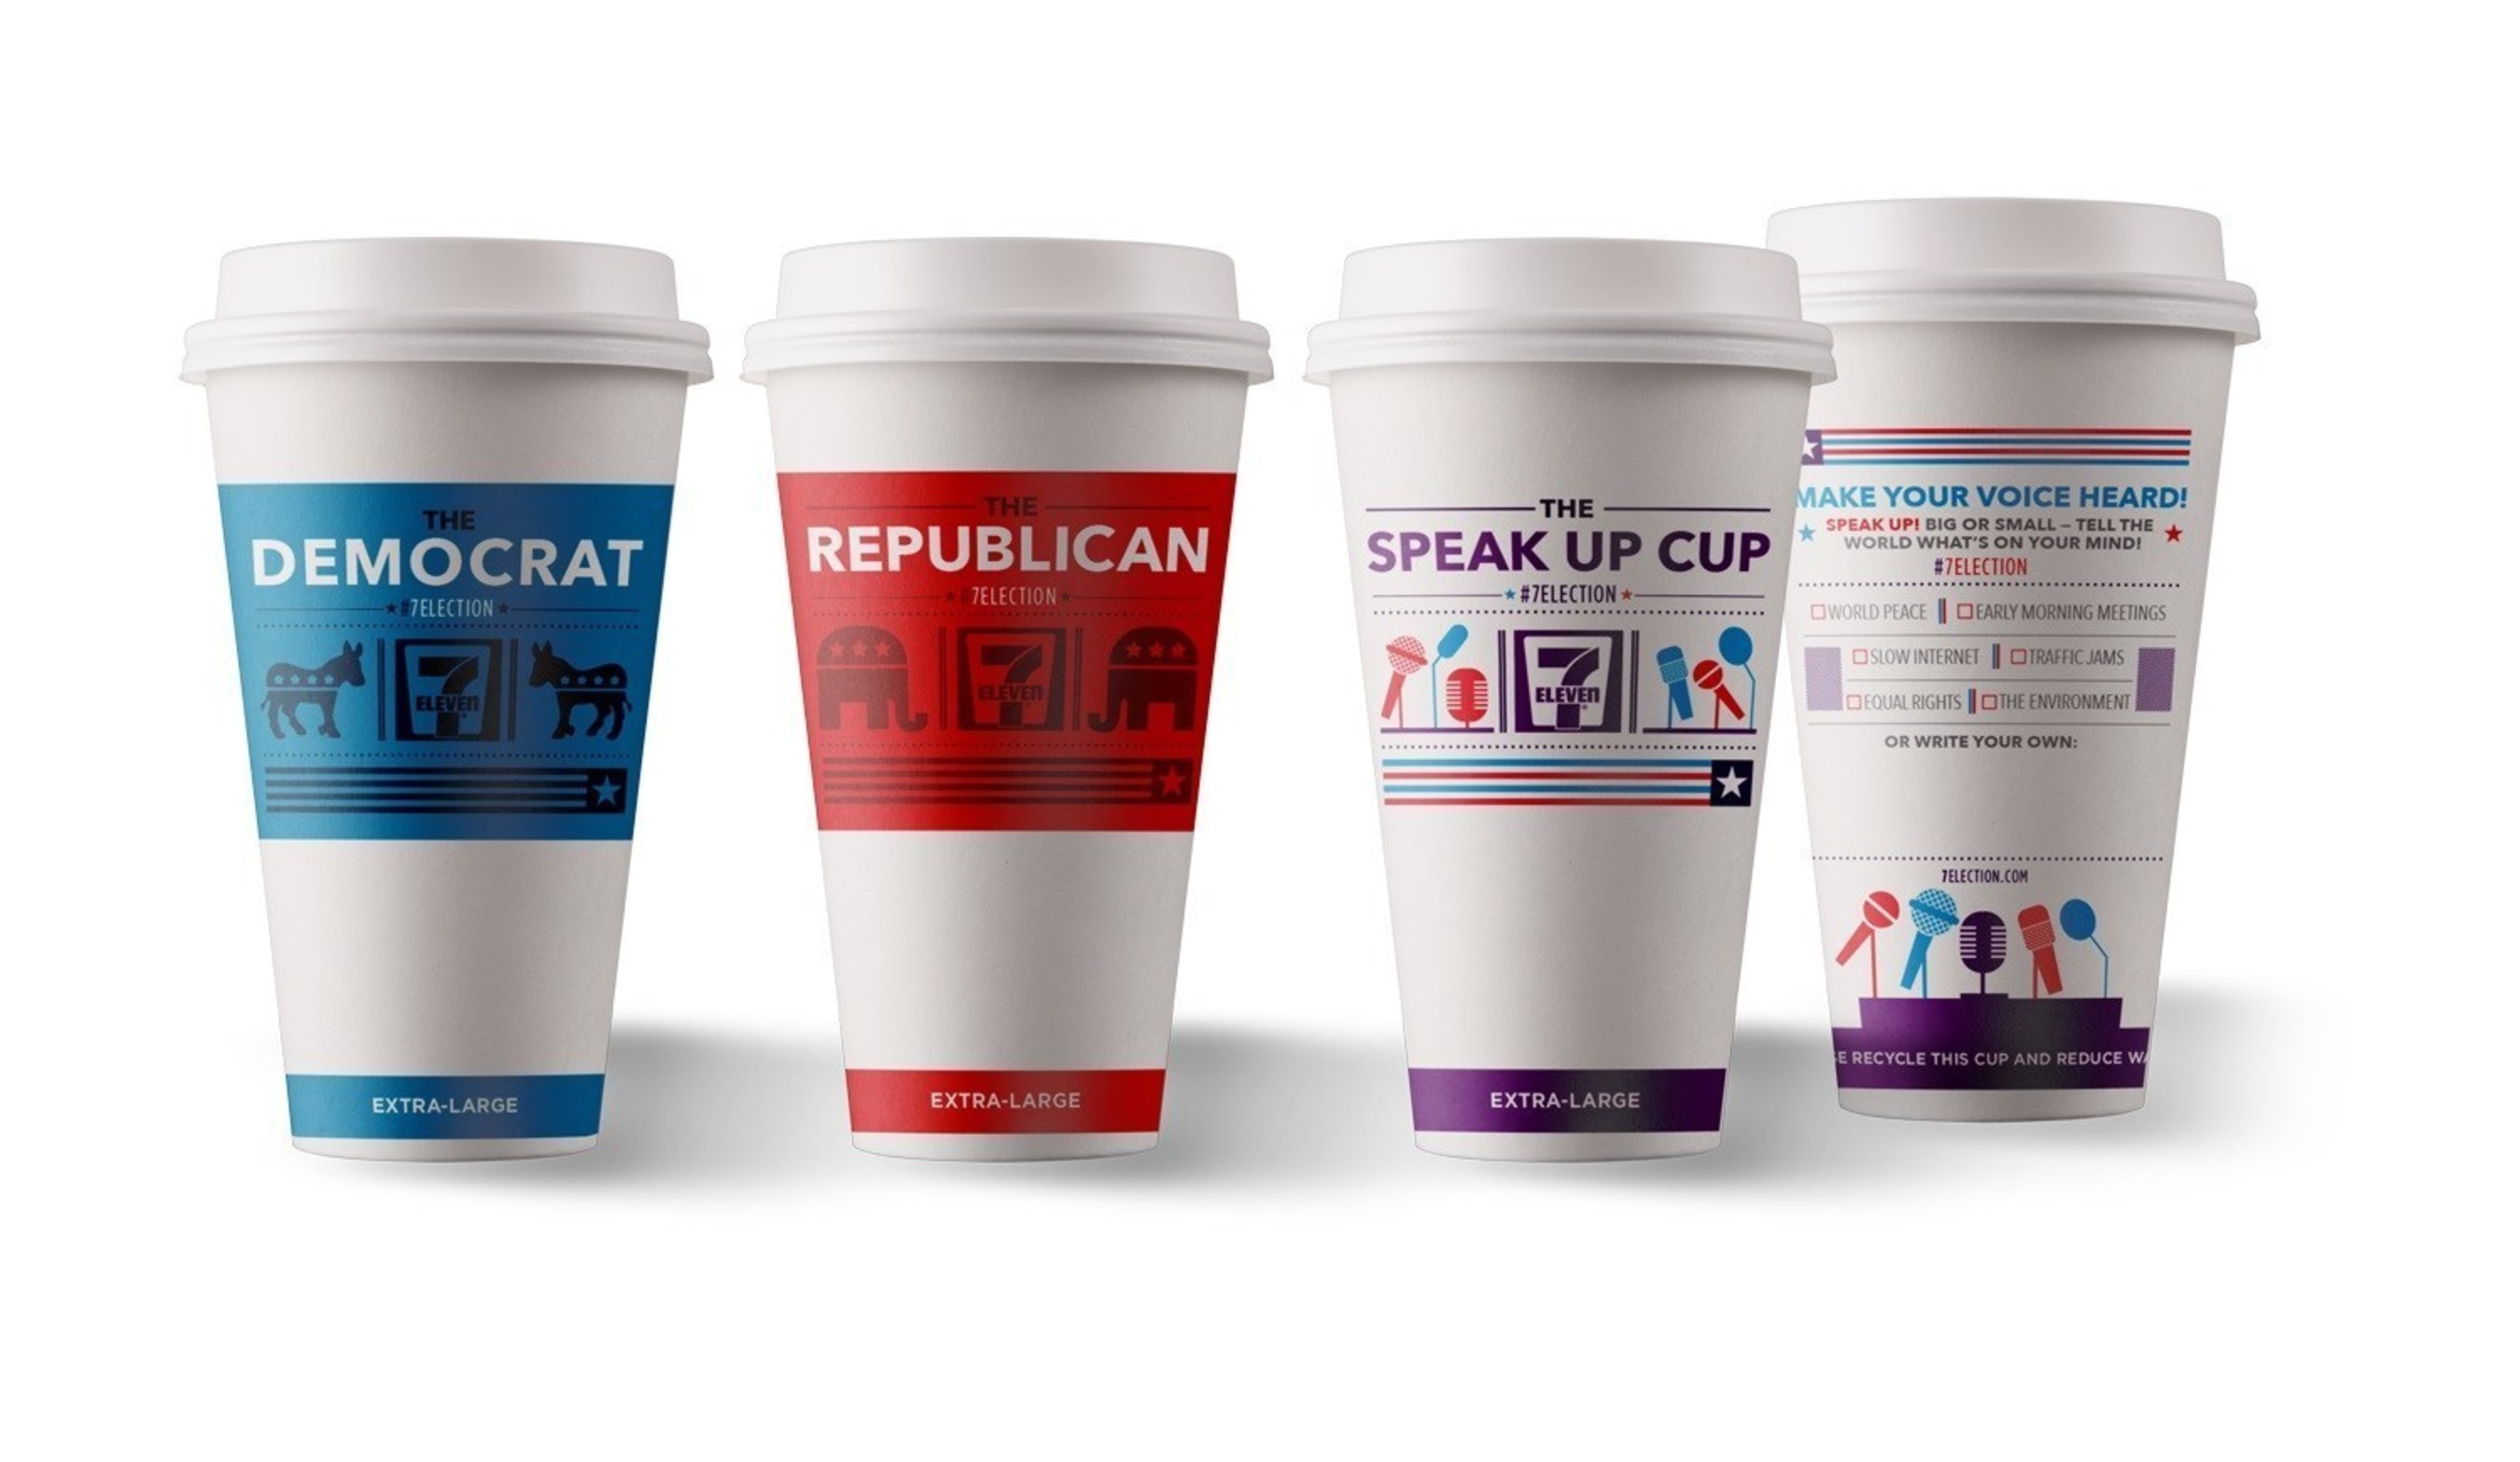 American coffee-lovers can let their voices be heard in the fifth quadrennial 7-Election(TM) Presidential Coffee Cup Poll at participating 7-Eleven(R) stores.